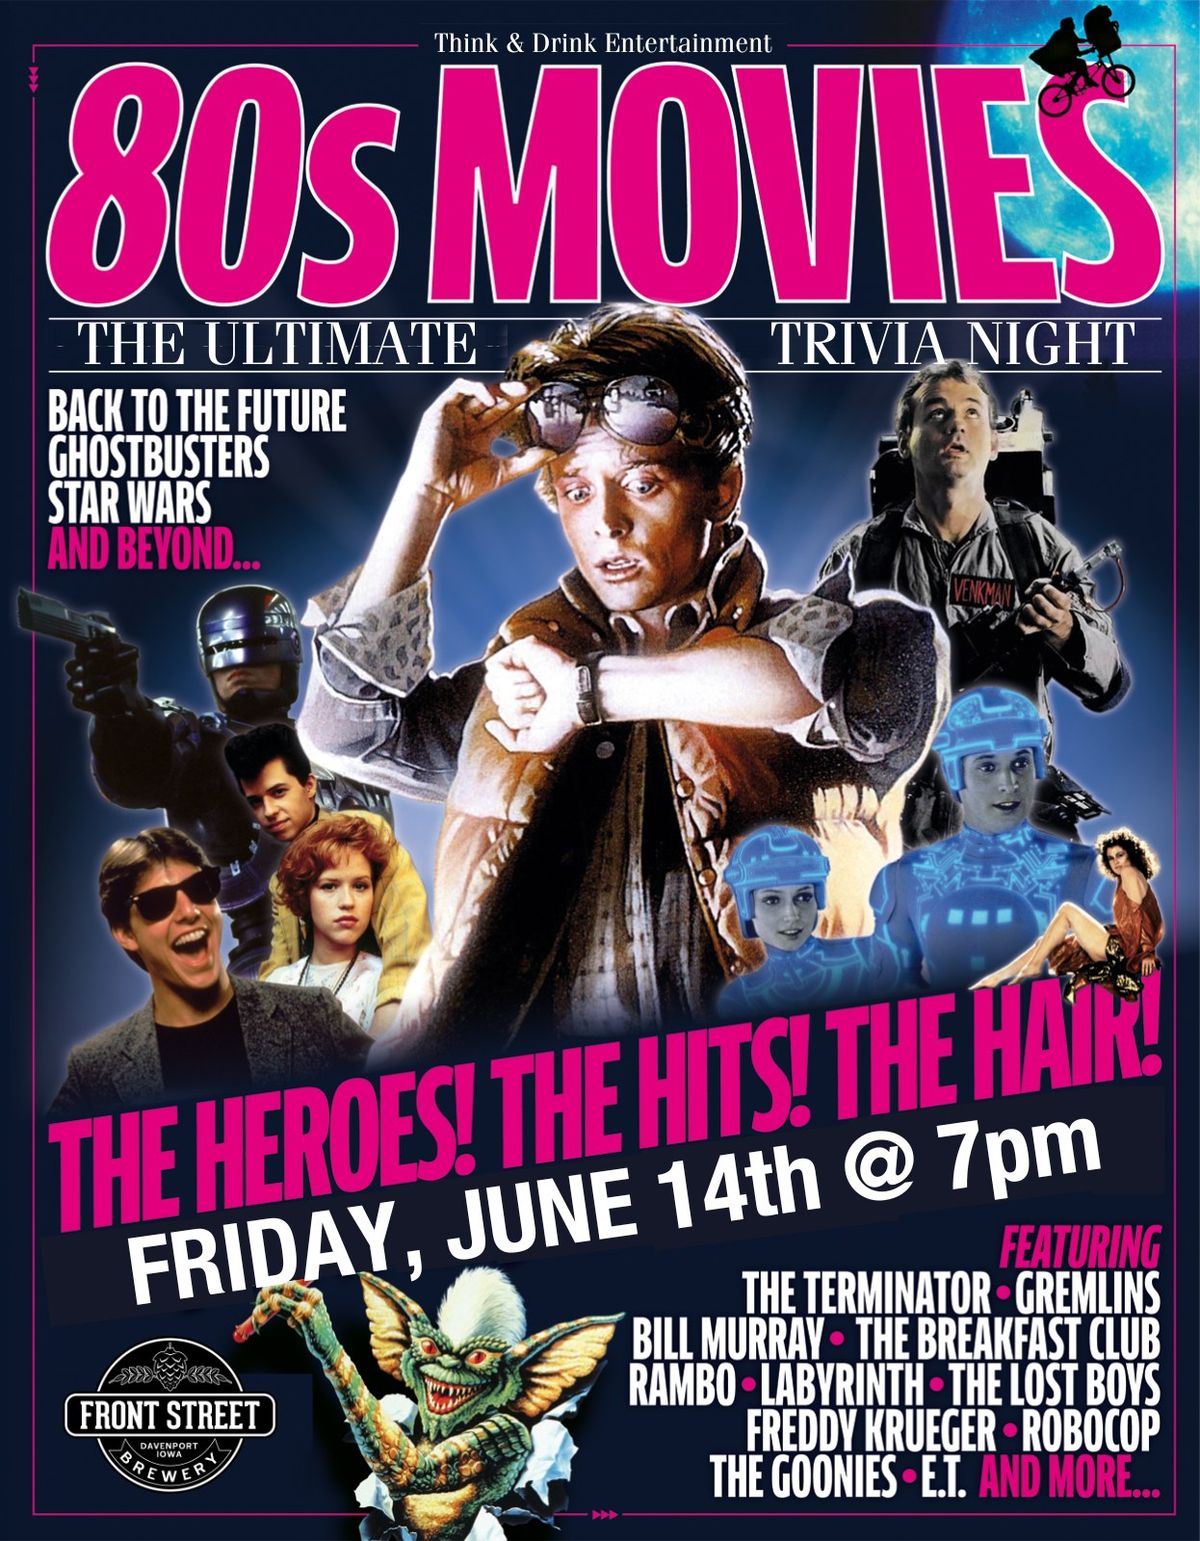 80's Movie Trivia @ Front Street Brewery (Davenport, IA) \/ Friday, June 14th @ 7pm